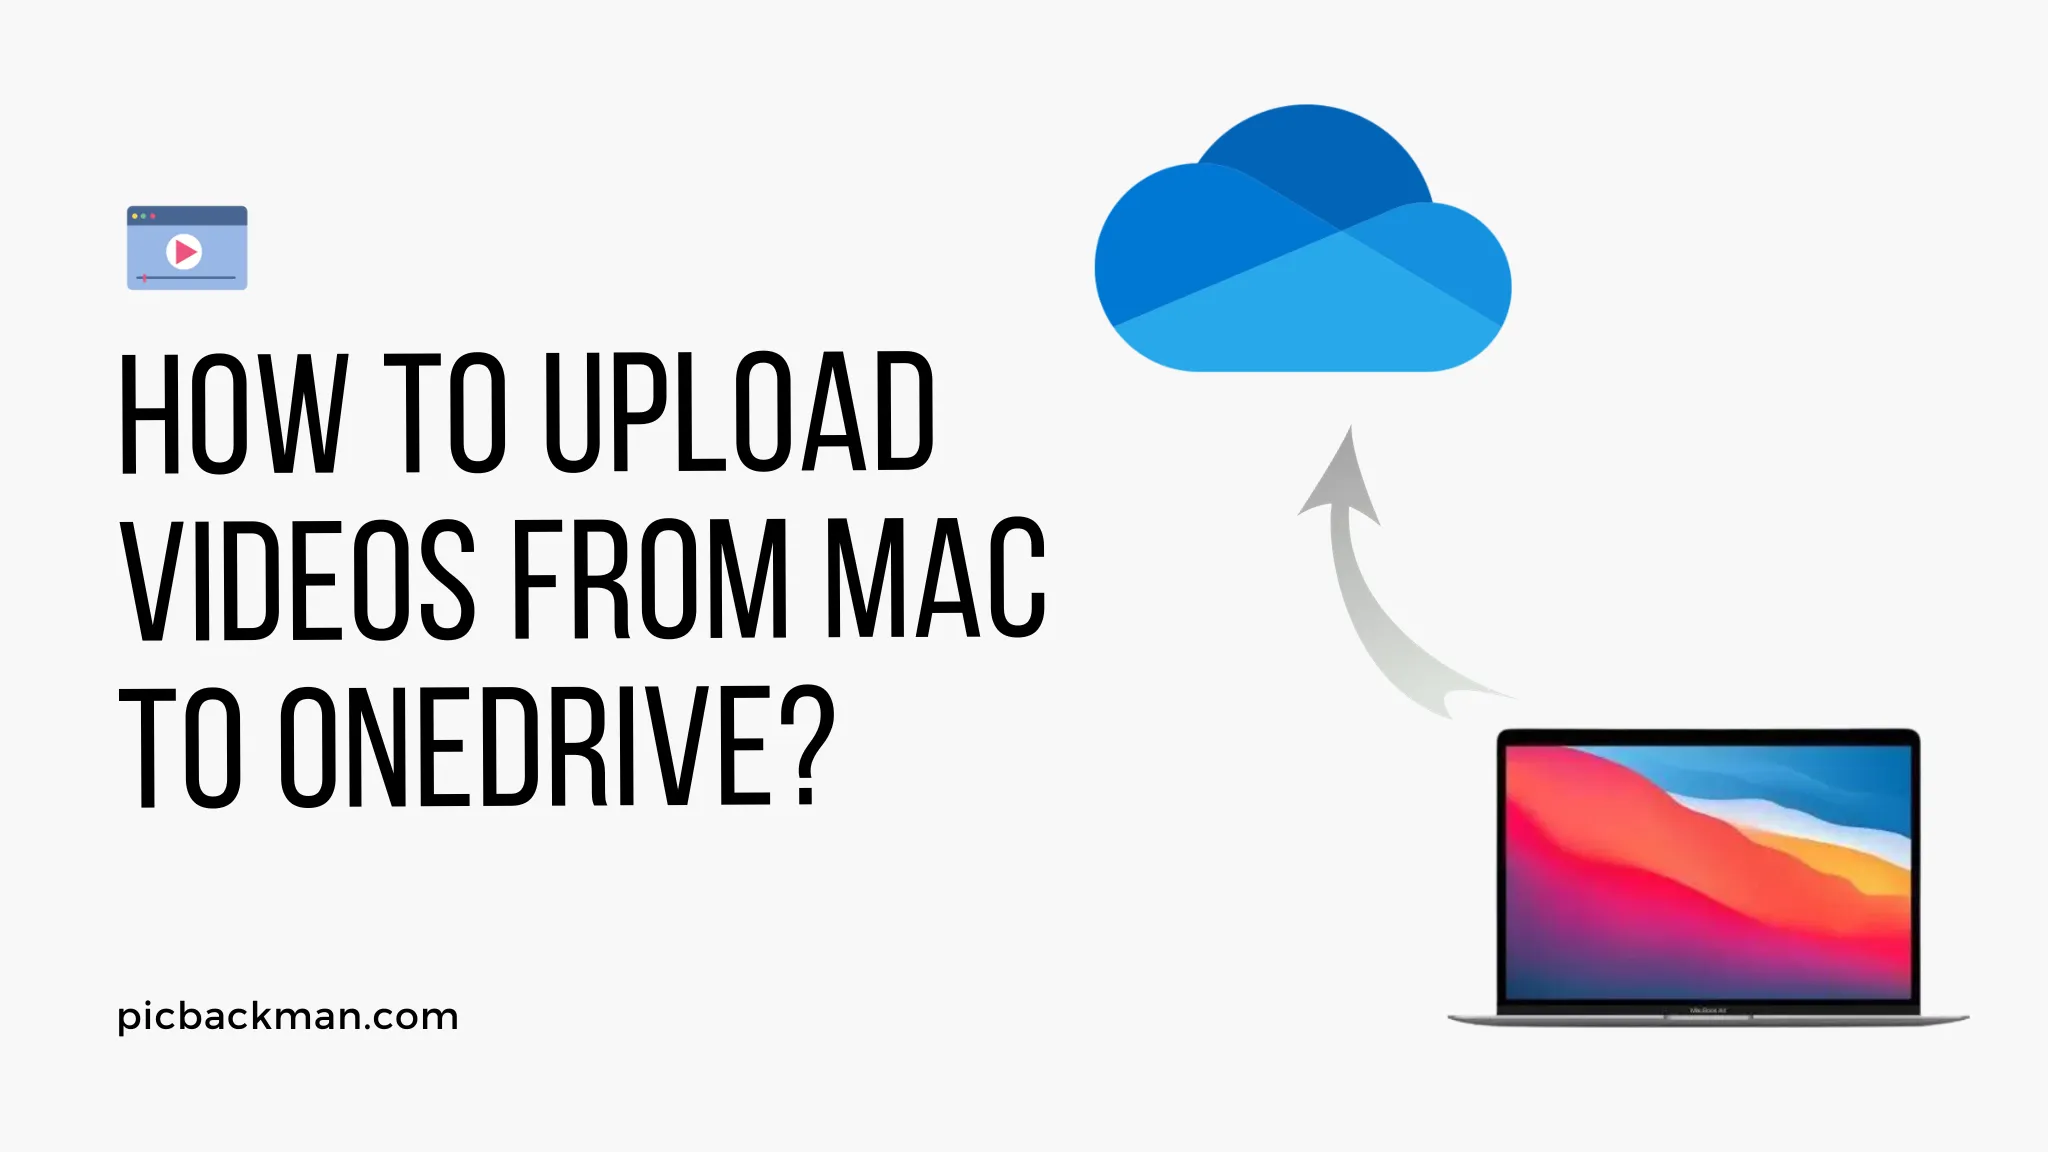 How to Upload Videos from Mac to OneDrive?